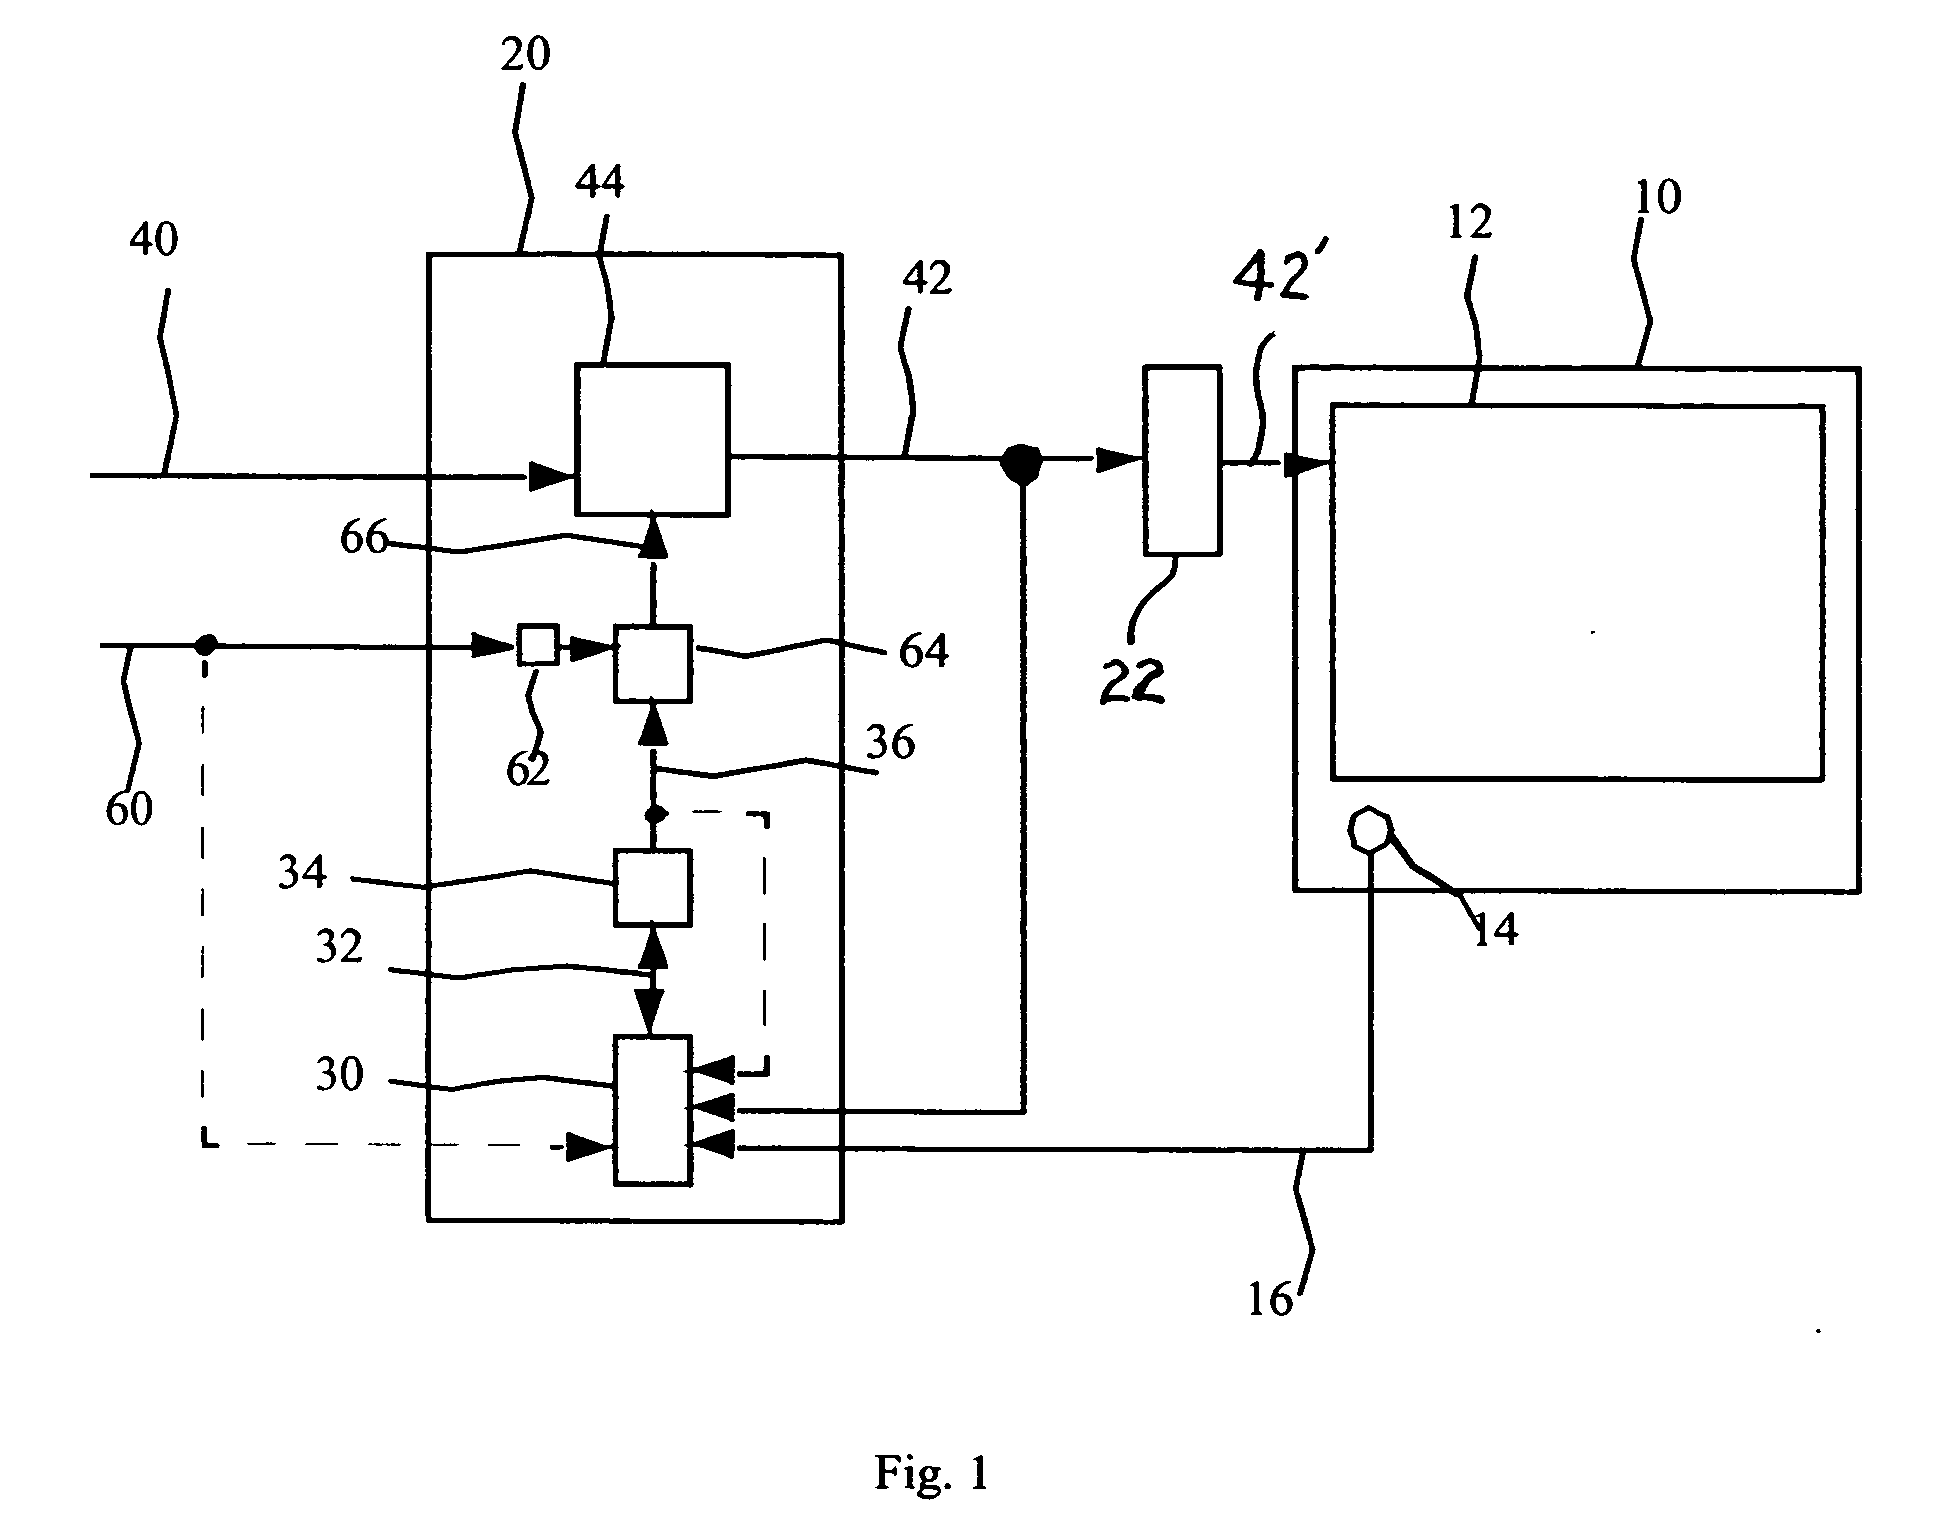 System for controlling an OLED display